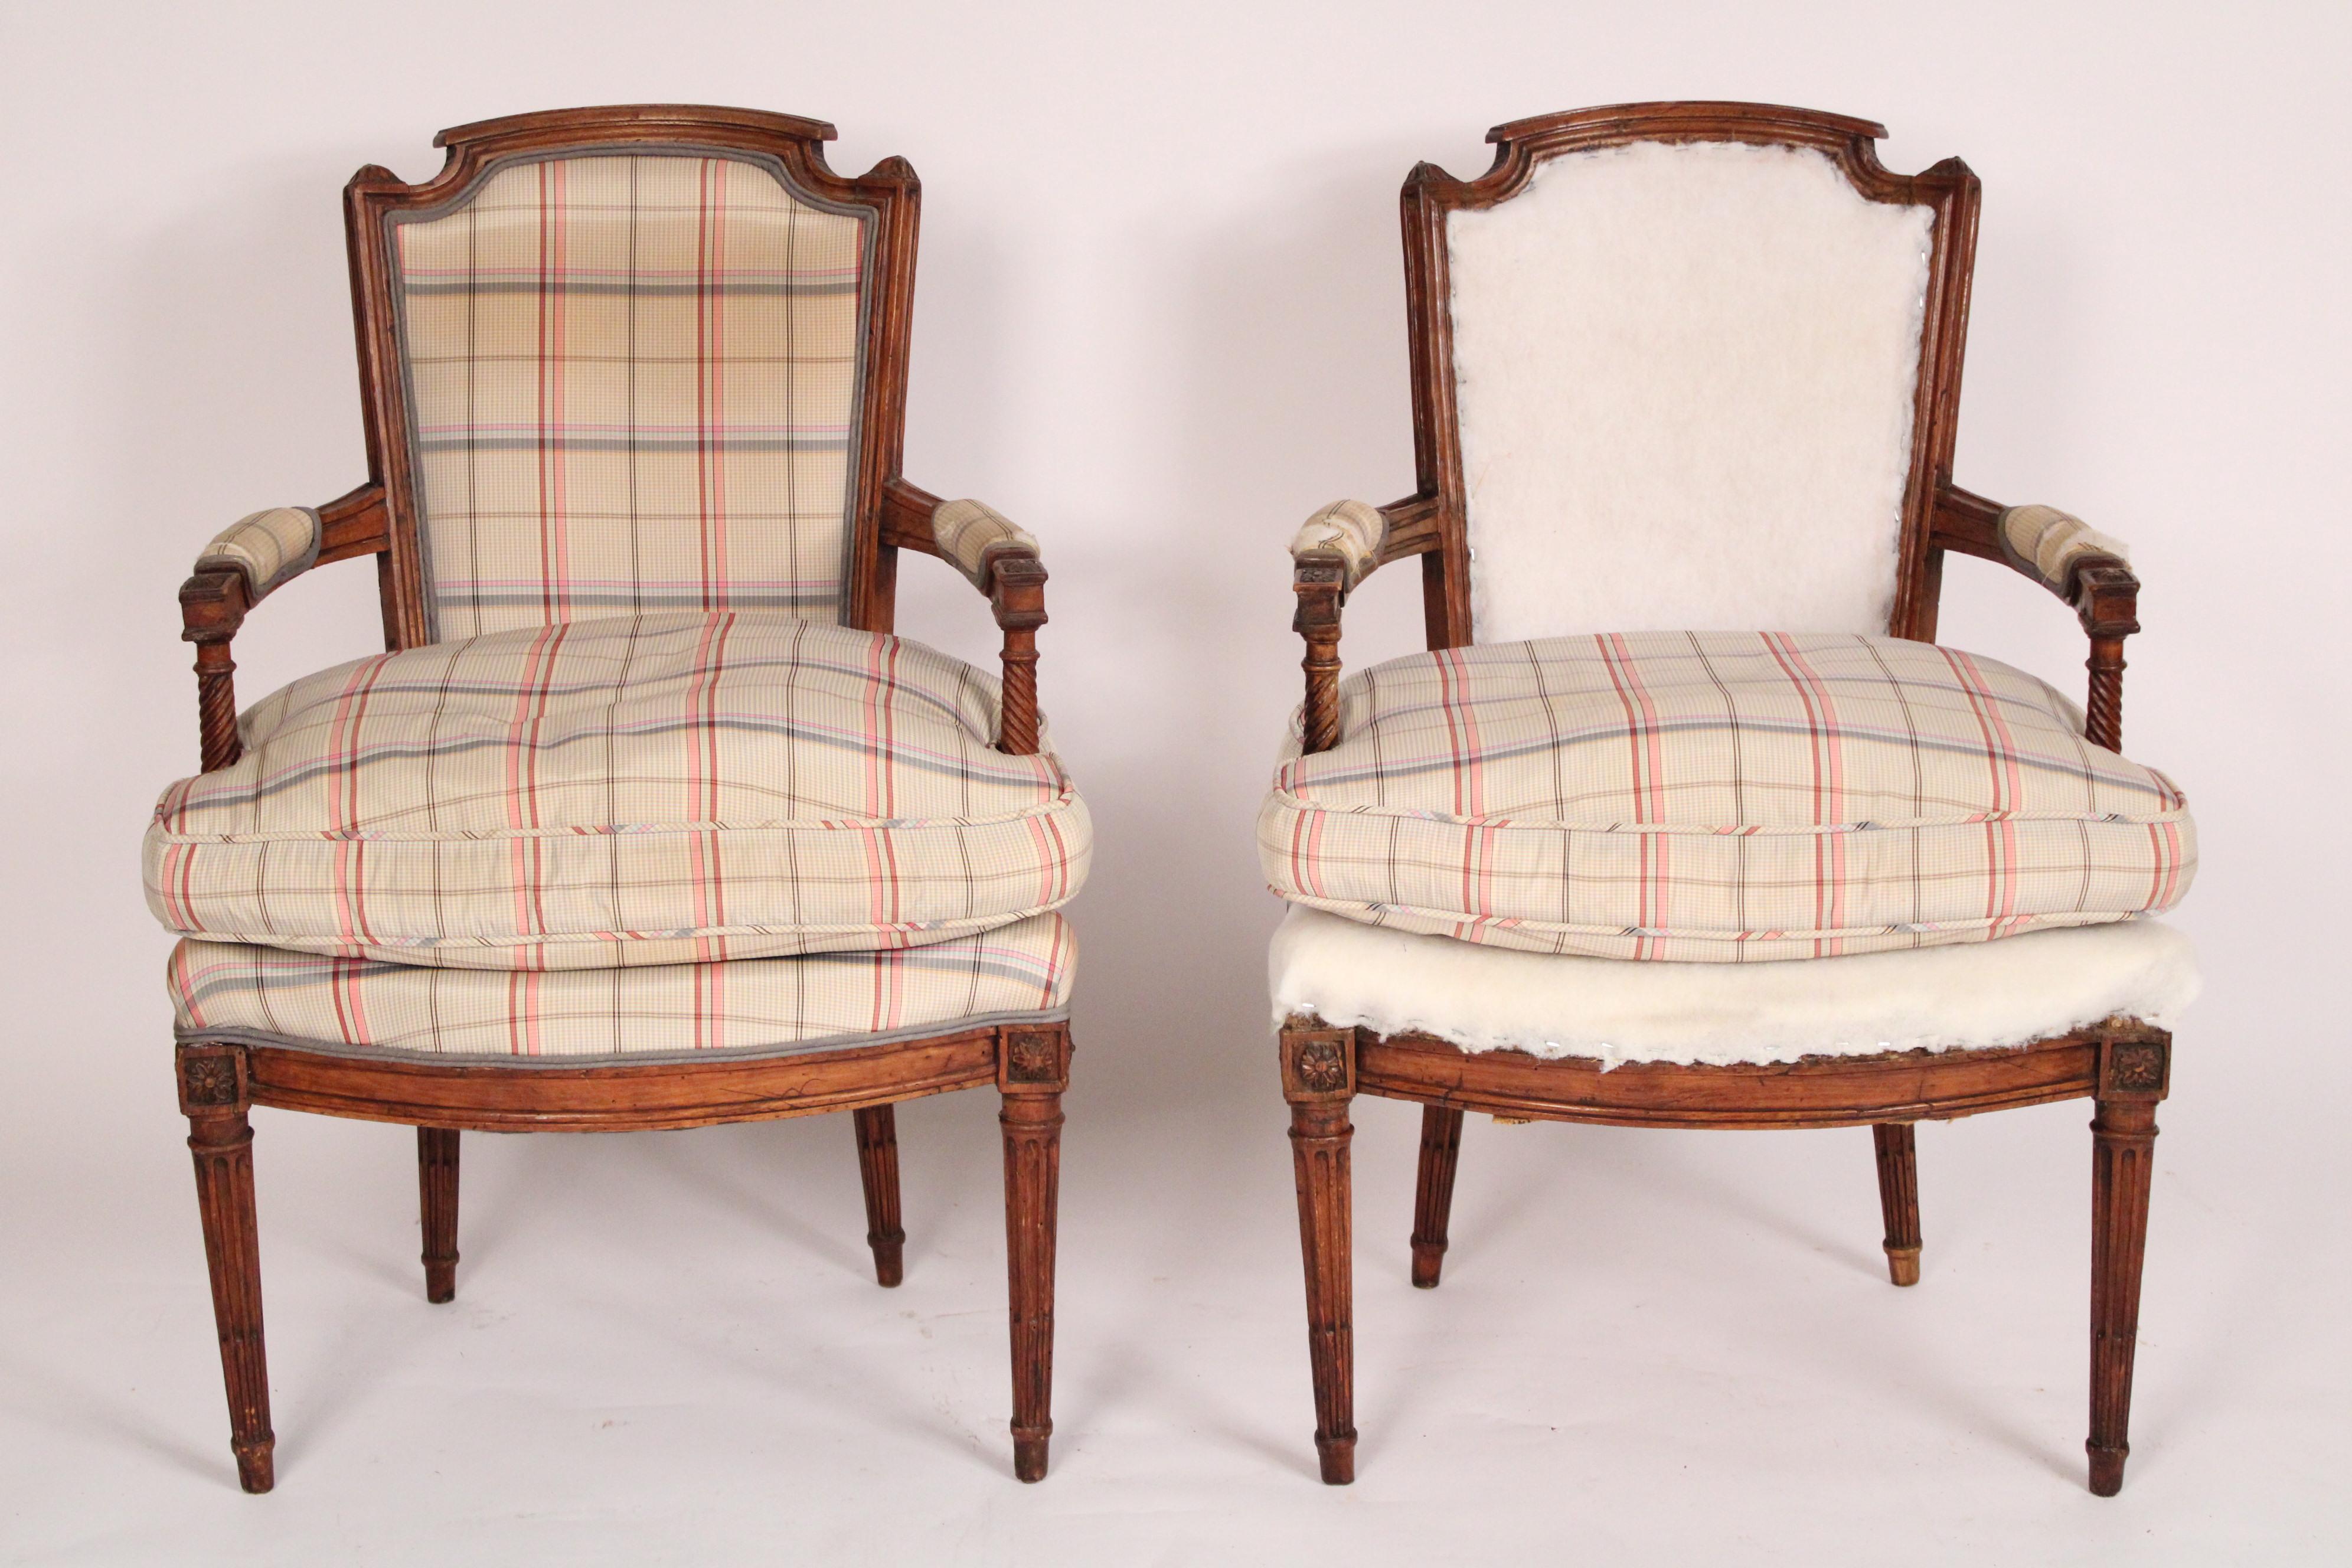 Pair of Louis XVI beech wood armchairs, circa 1800. Seat cushion is 50% down and 50% feathers.